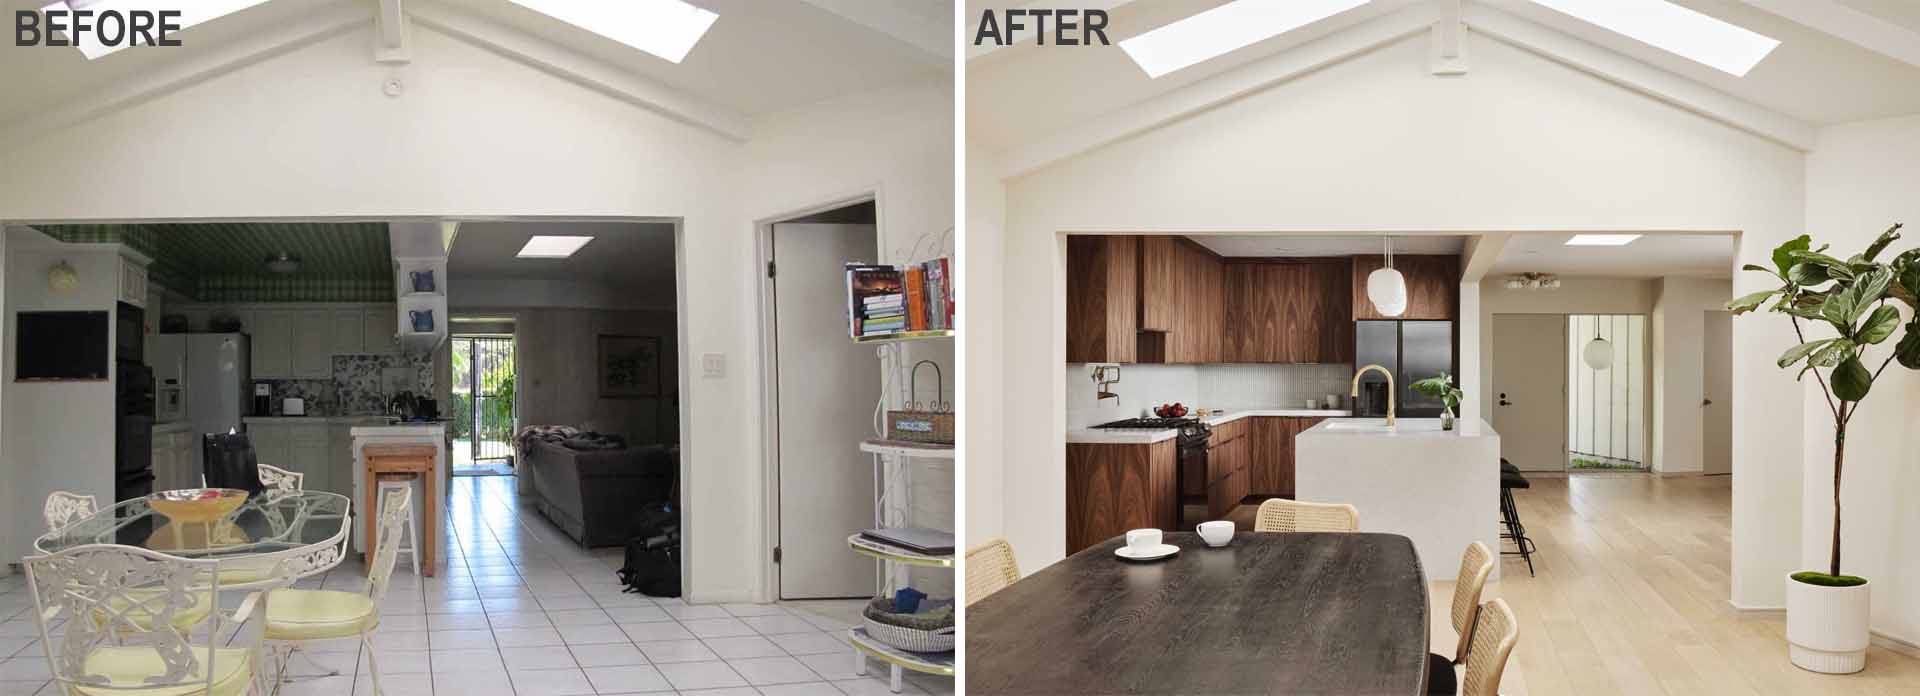 before-&-after-–-remodeled-kitchen-and-bathrooms-for-a-mid-century-modern-home